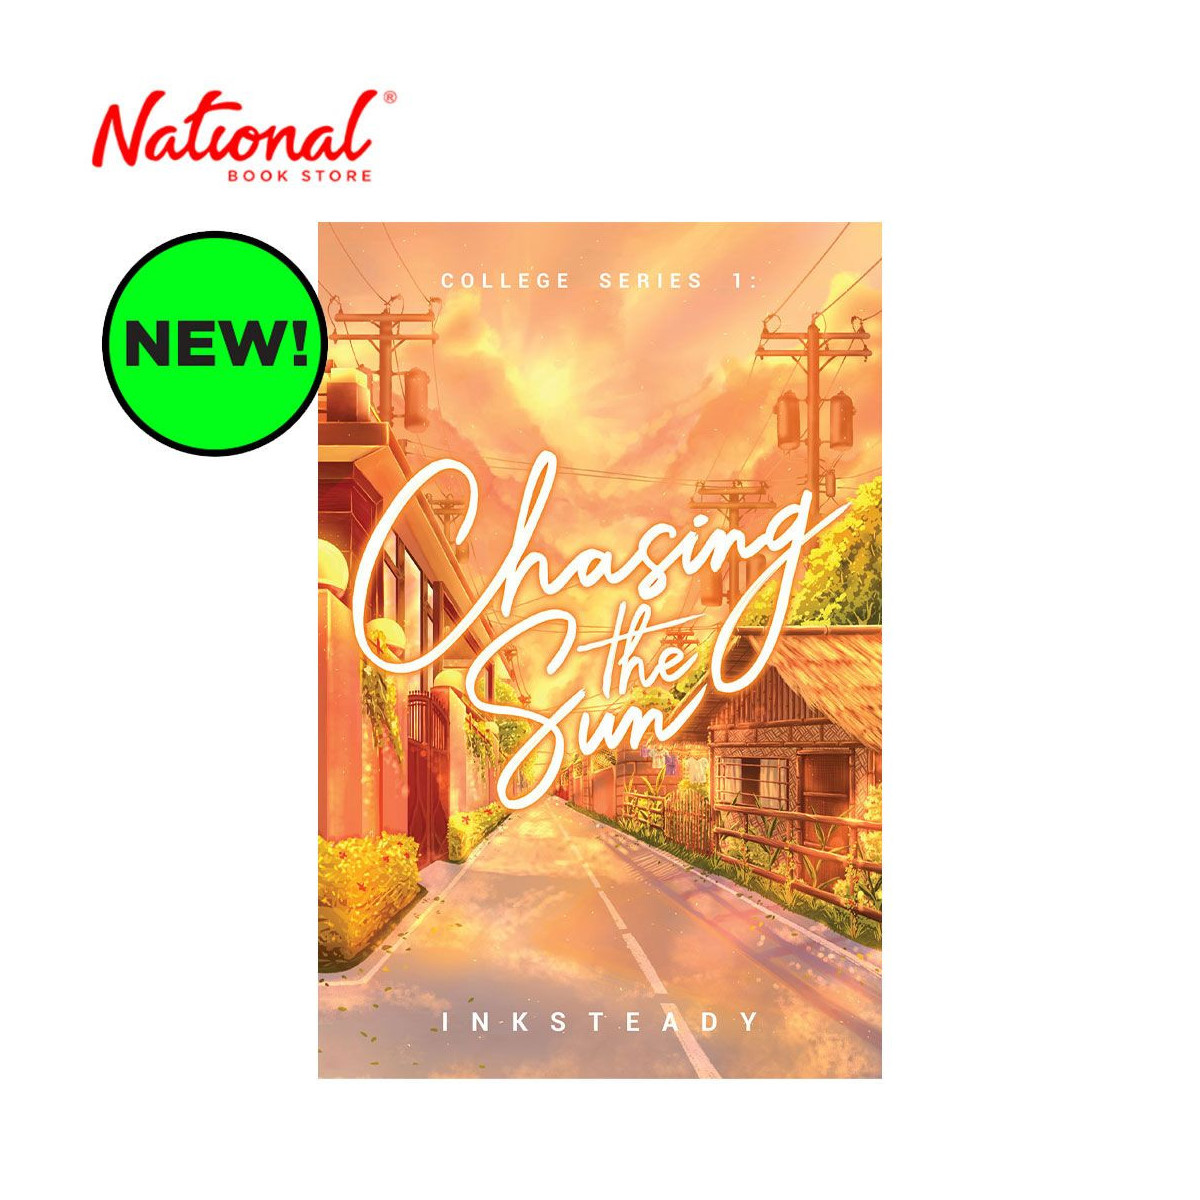 College Series 1: Chasing The Sun 2023 Edition by Inksteady - Trade Paperback